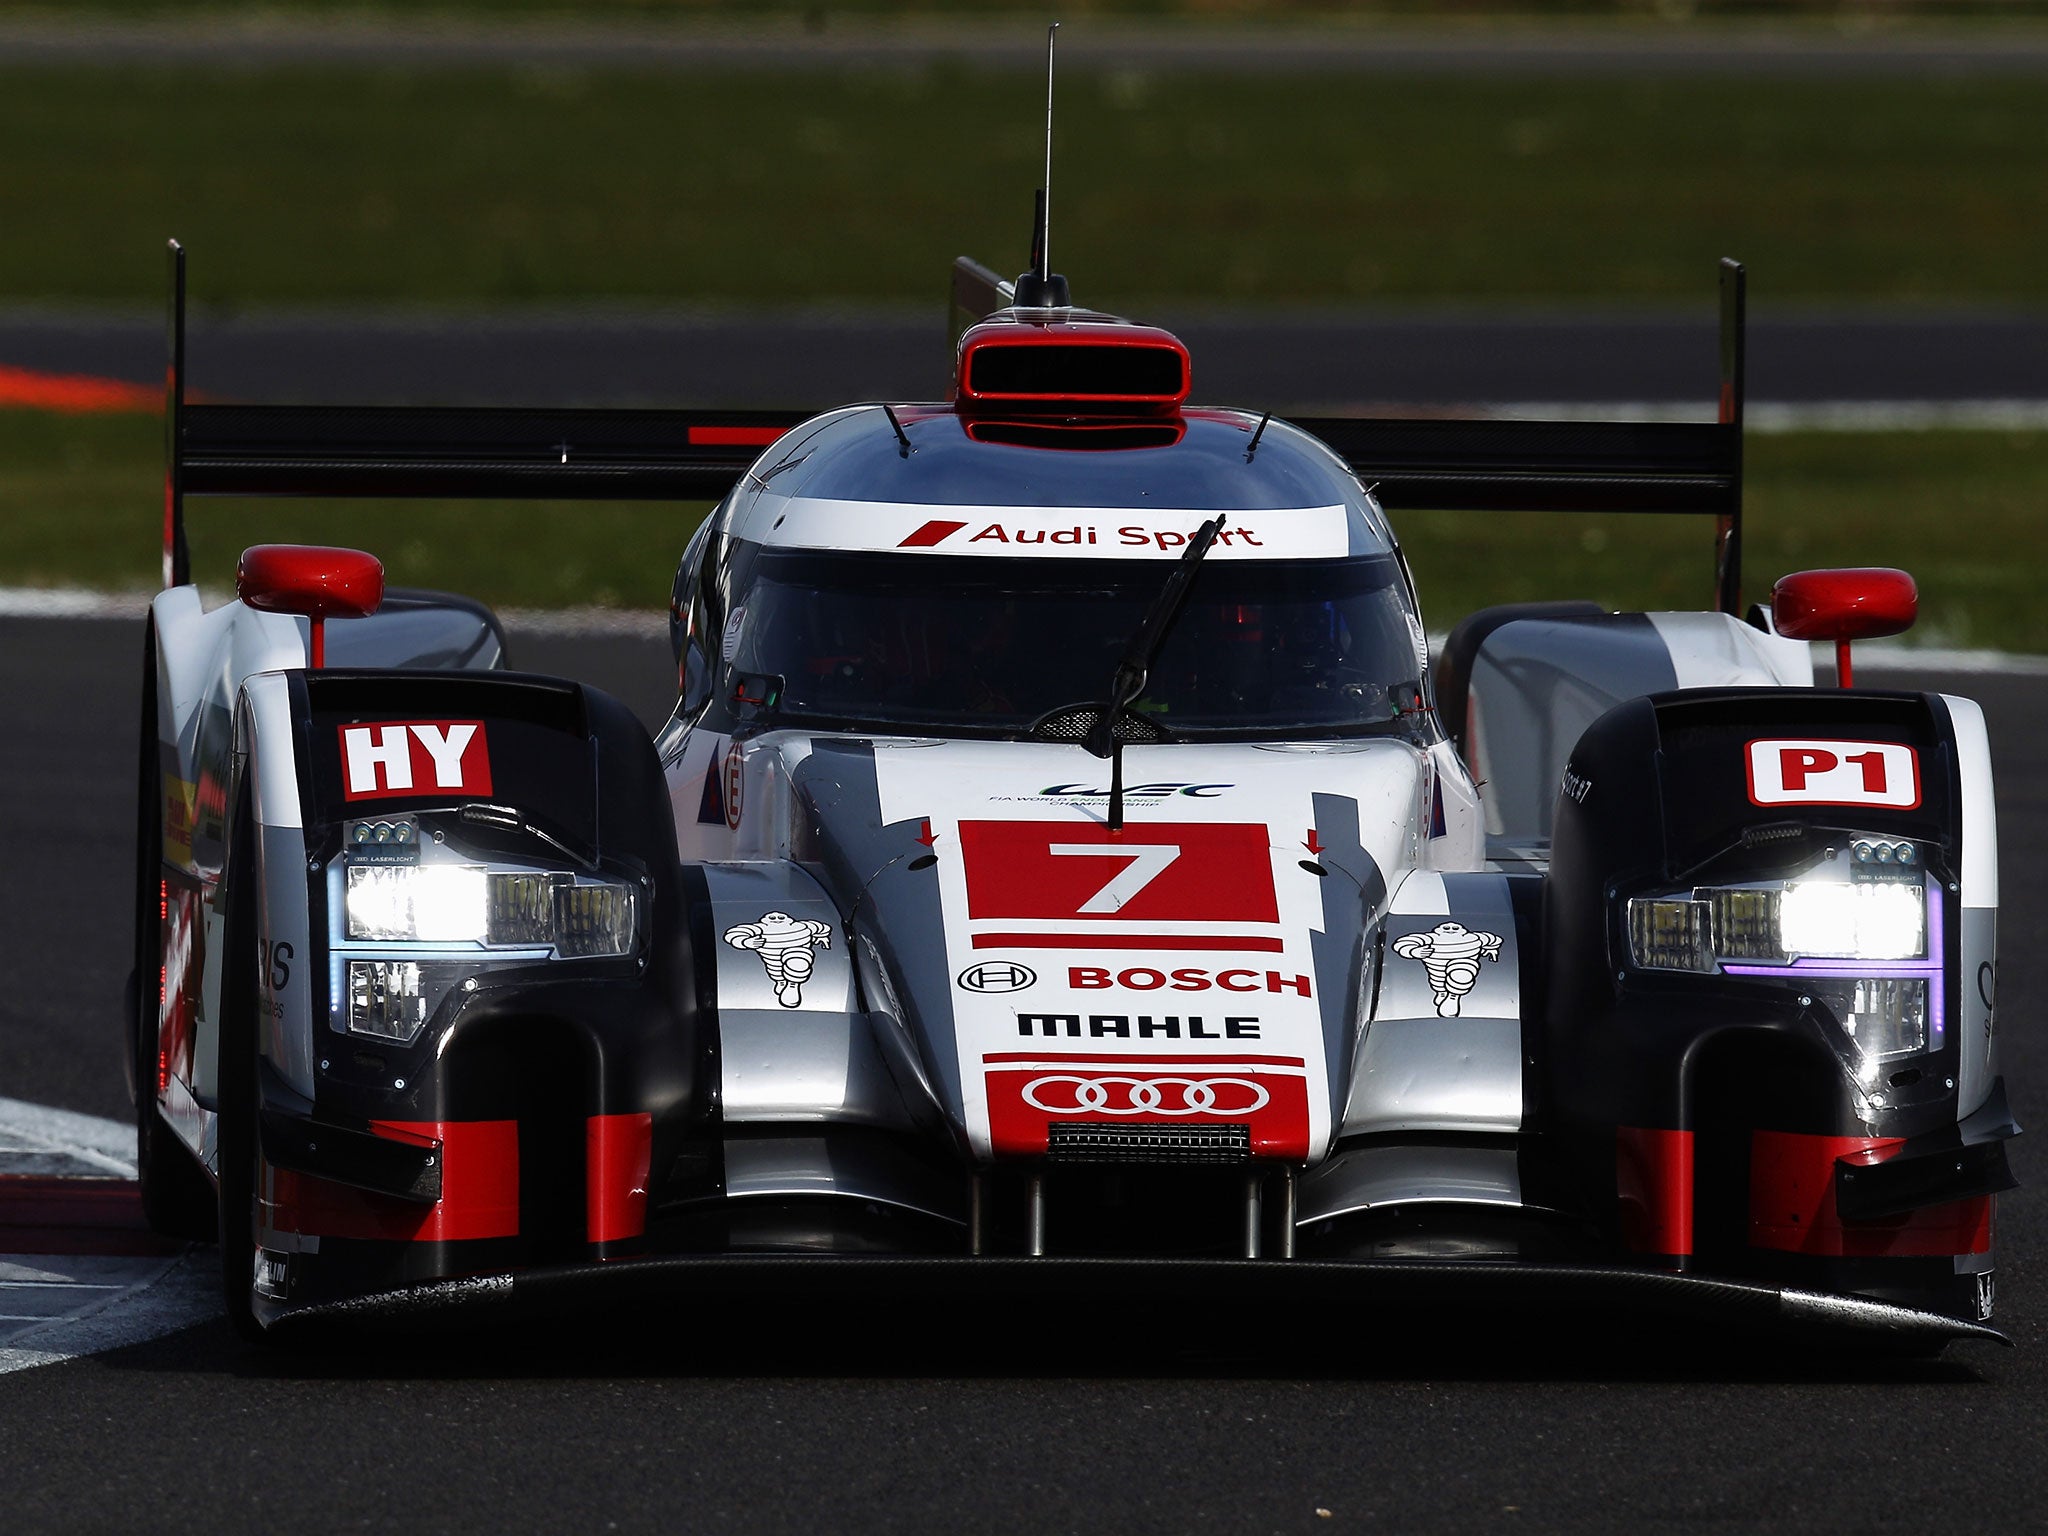 The No 7 Audi outfit have won both World Endurance Championship races this season